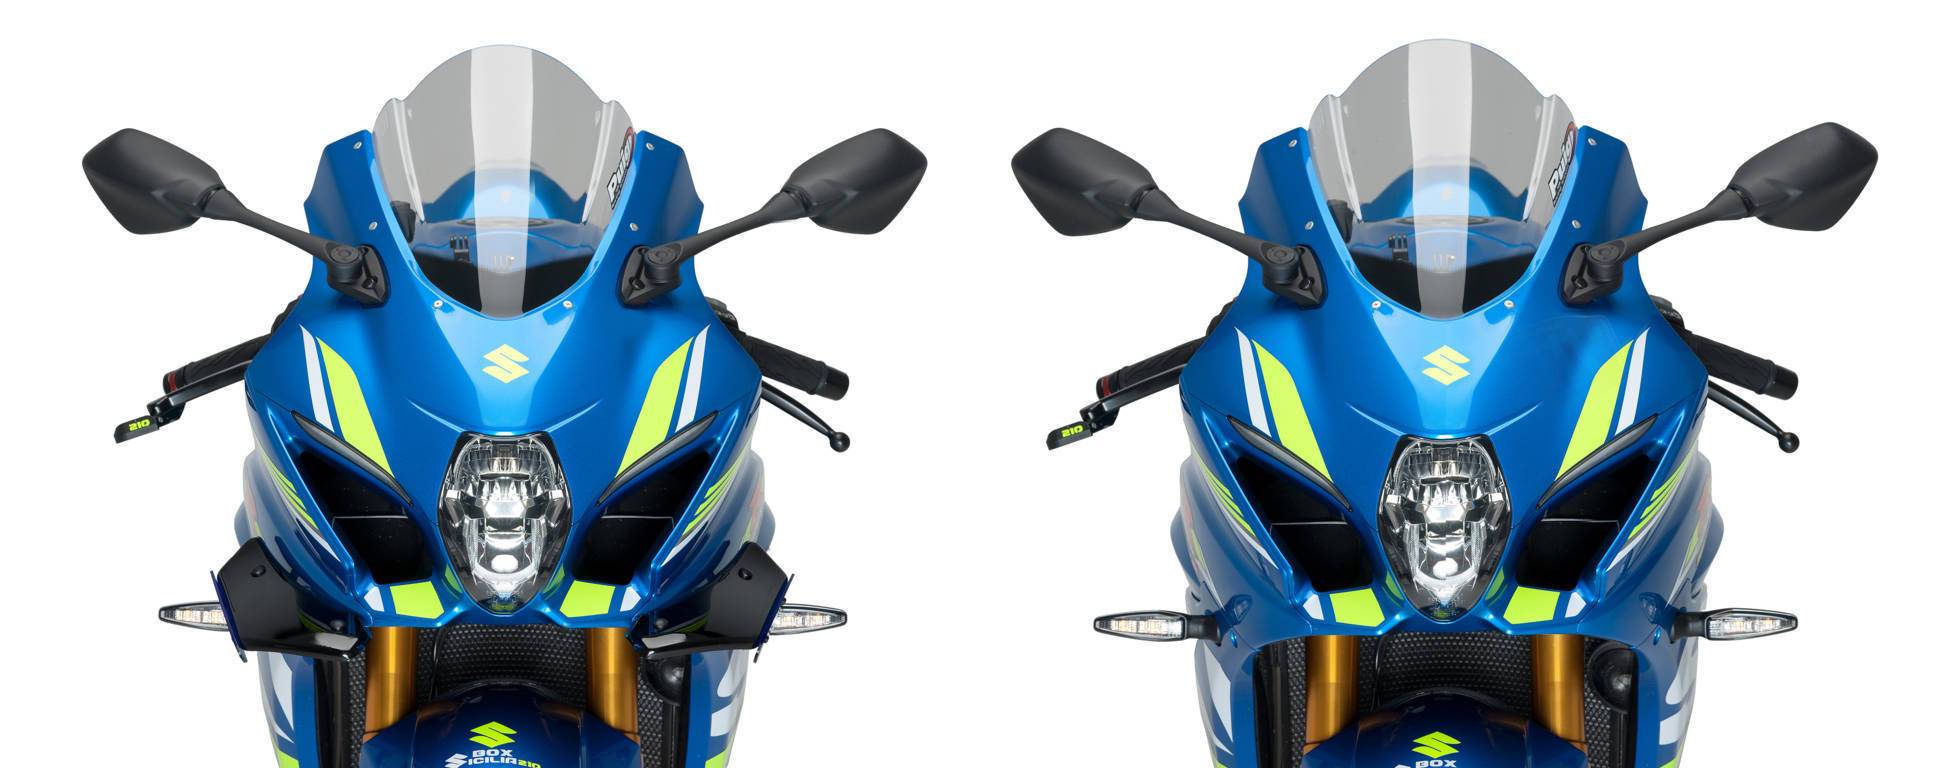 Puig Side Downforce Spoilers | Black/Red | Suzuki GSX-R1000 2017>Current-M9738R-Side Spoilers-Pyramid Motorcycle Accessories